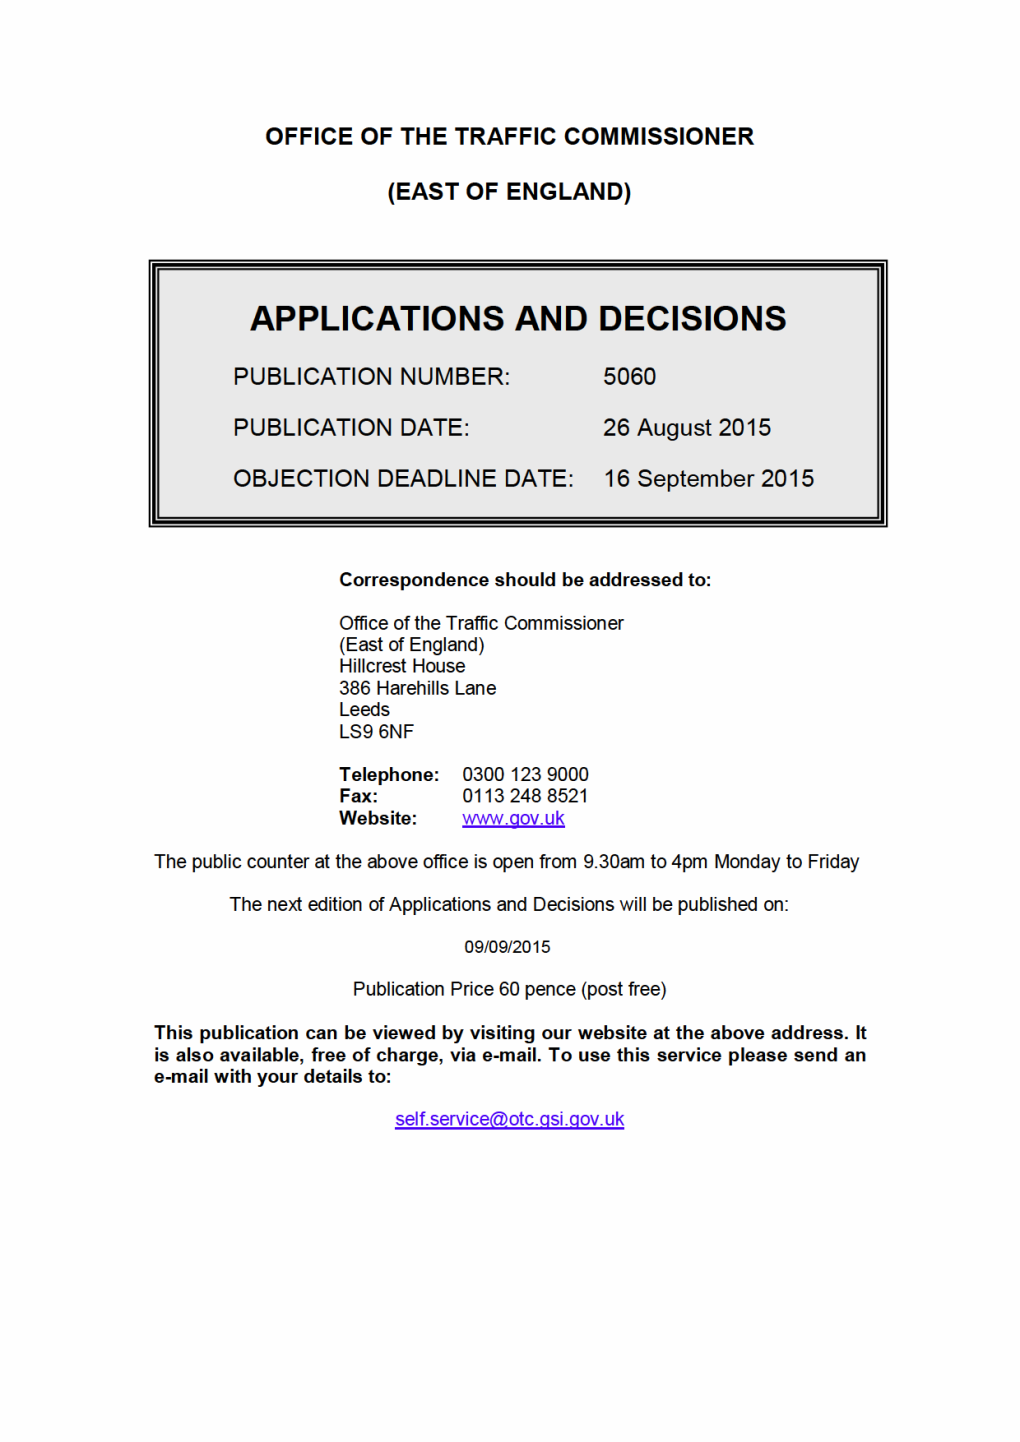 Applications and Decisions for the Office of the Traffic Commissioners (East of England)